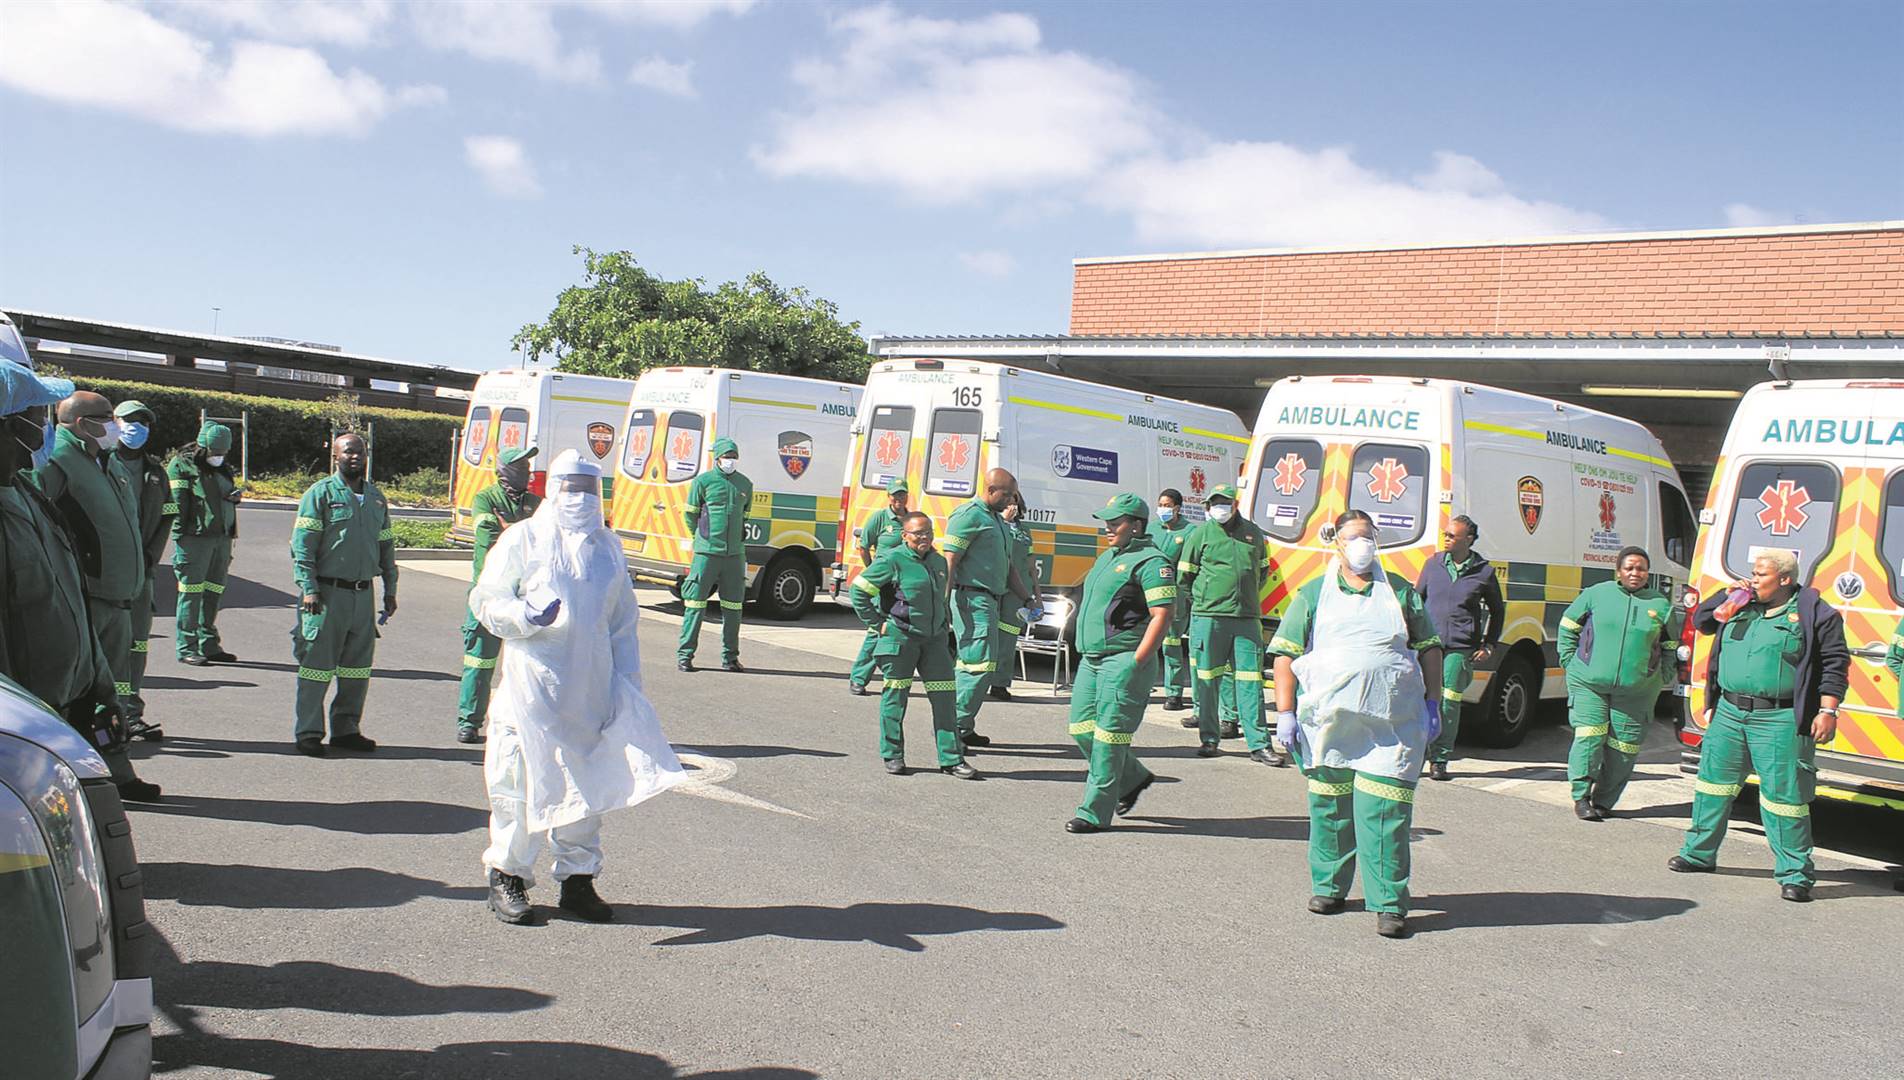 Emergency services workers park their ambulances all day after refusing to work over lack of protective equipment. Photo: Lindile Mbontsi/File